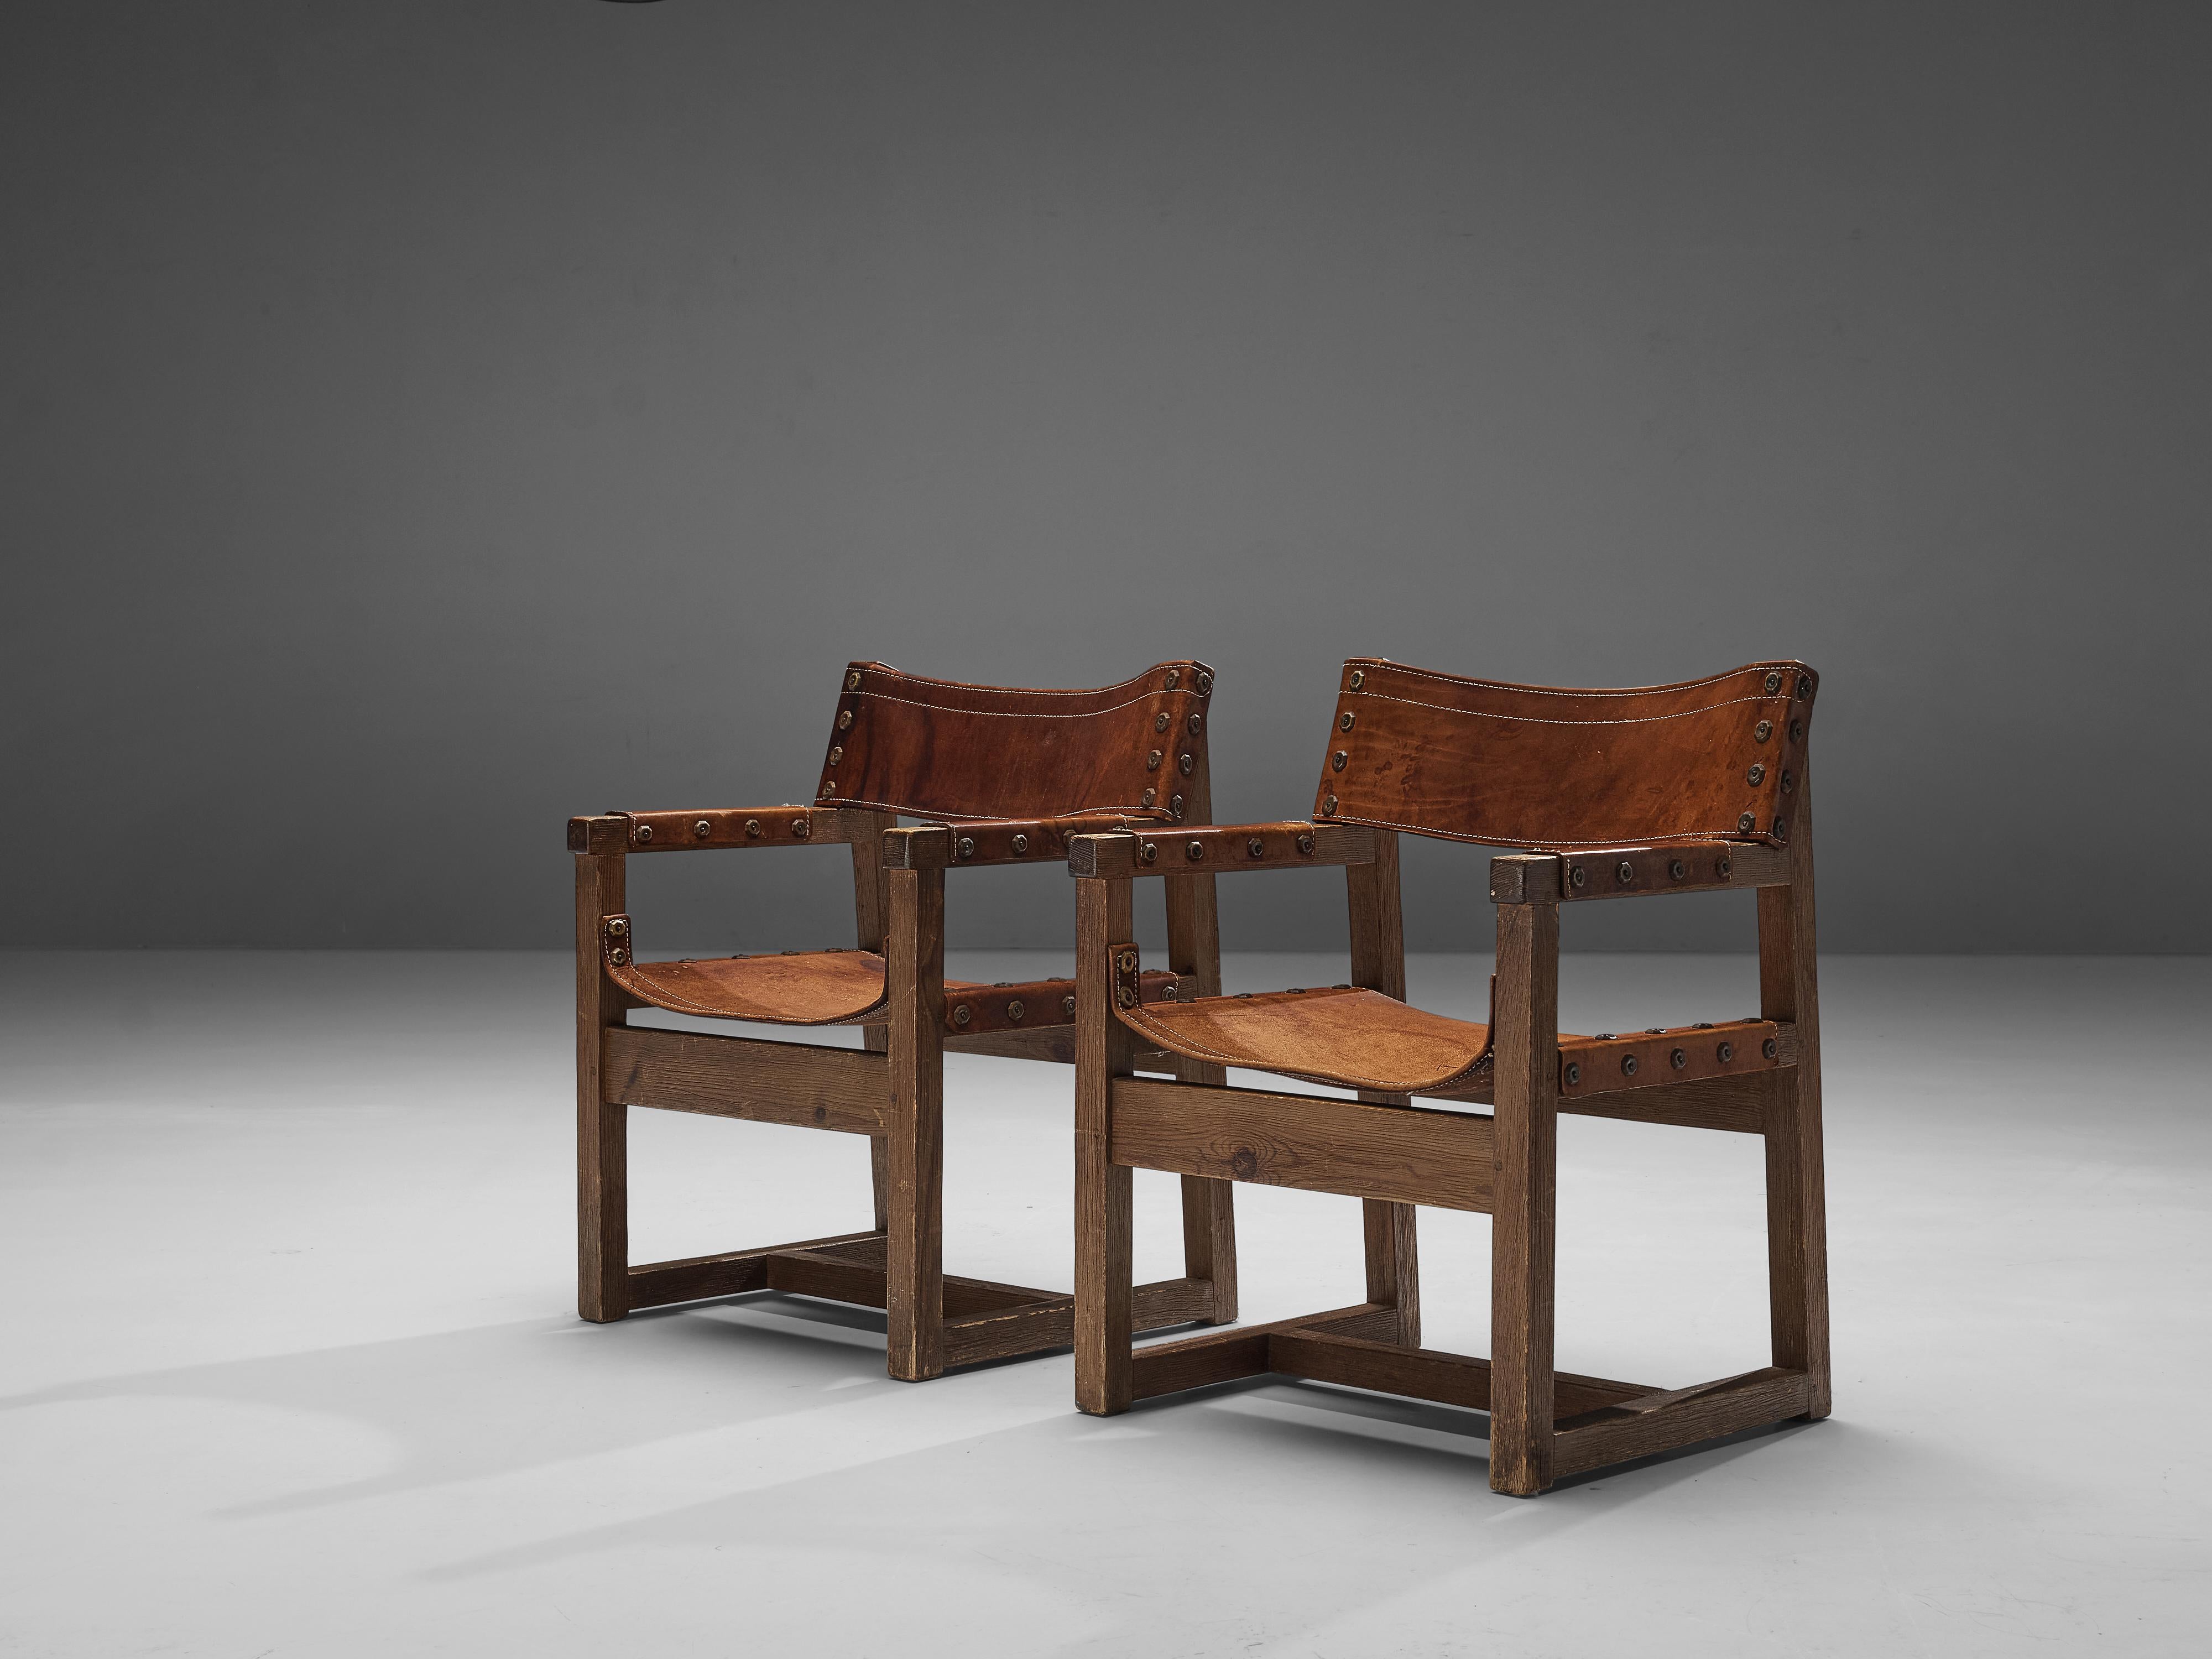 Brass Biosca Brutalist Spanish Pair of Armchairs in Cognac Leather and Pine 